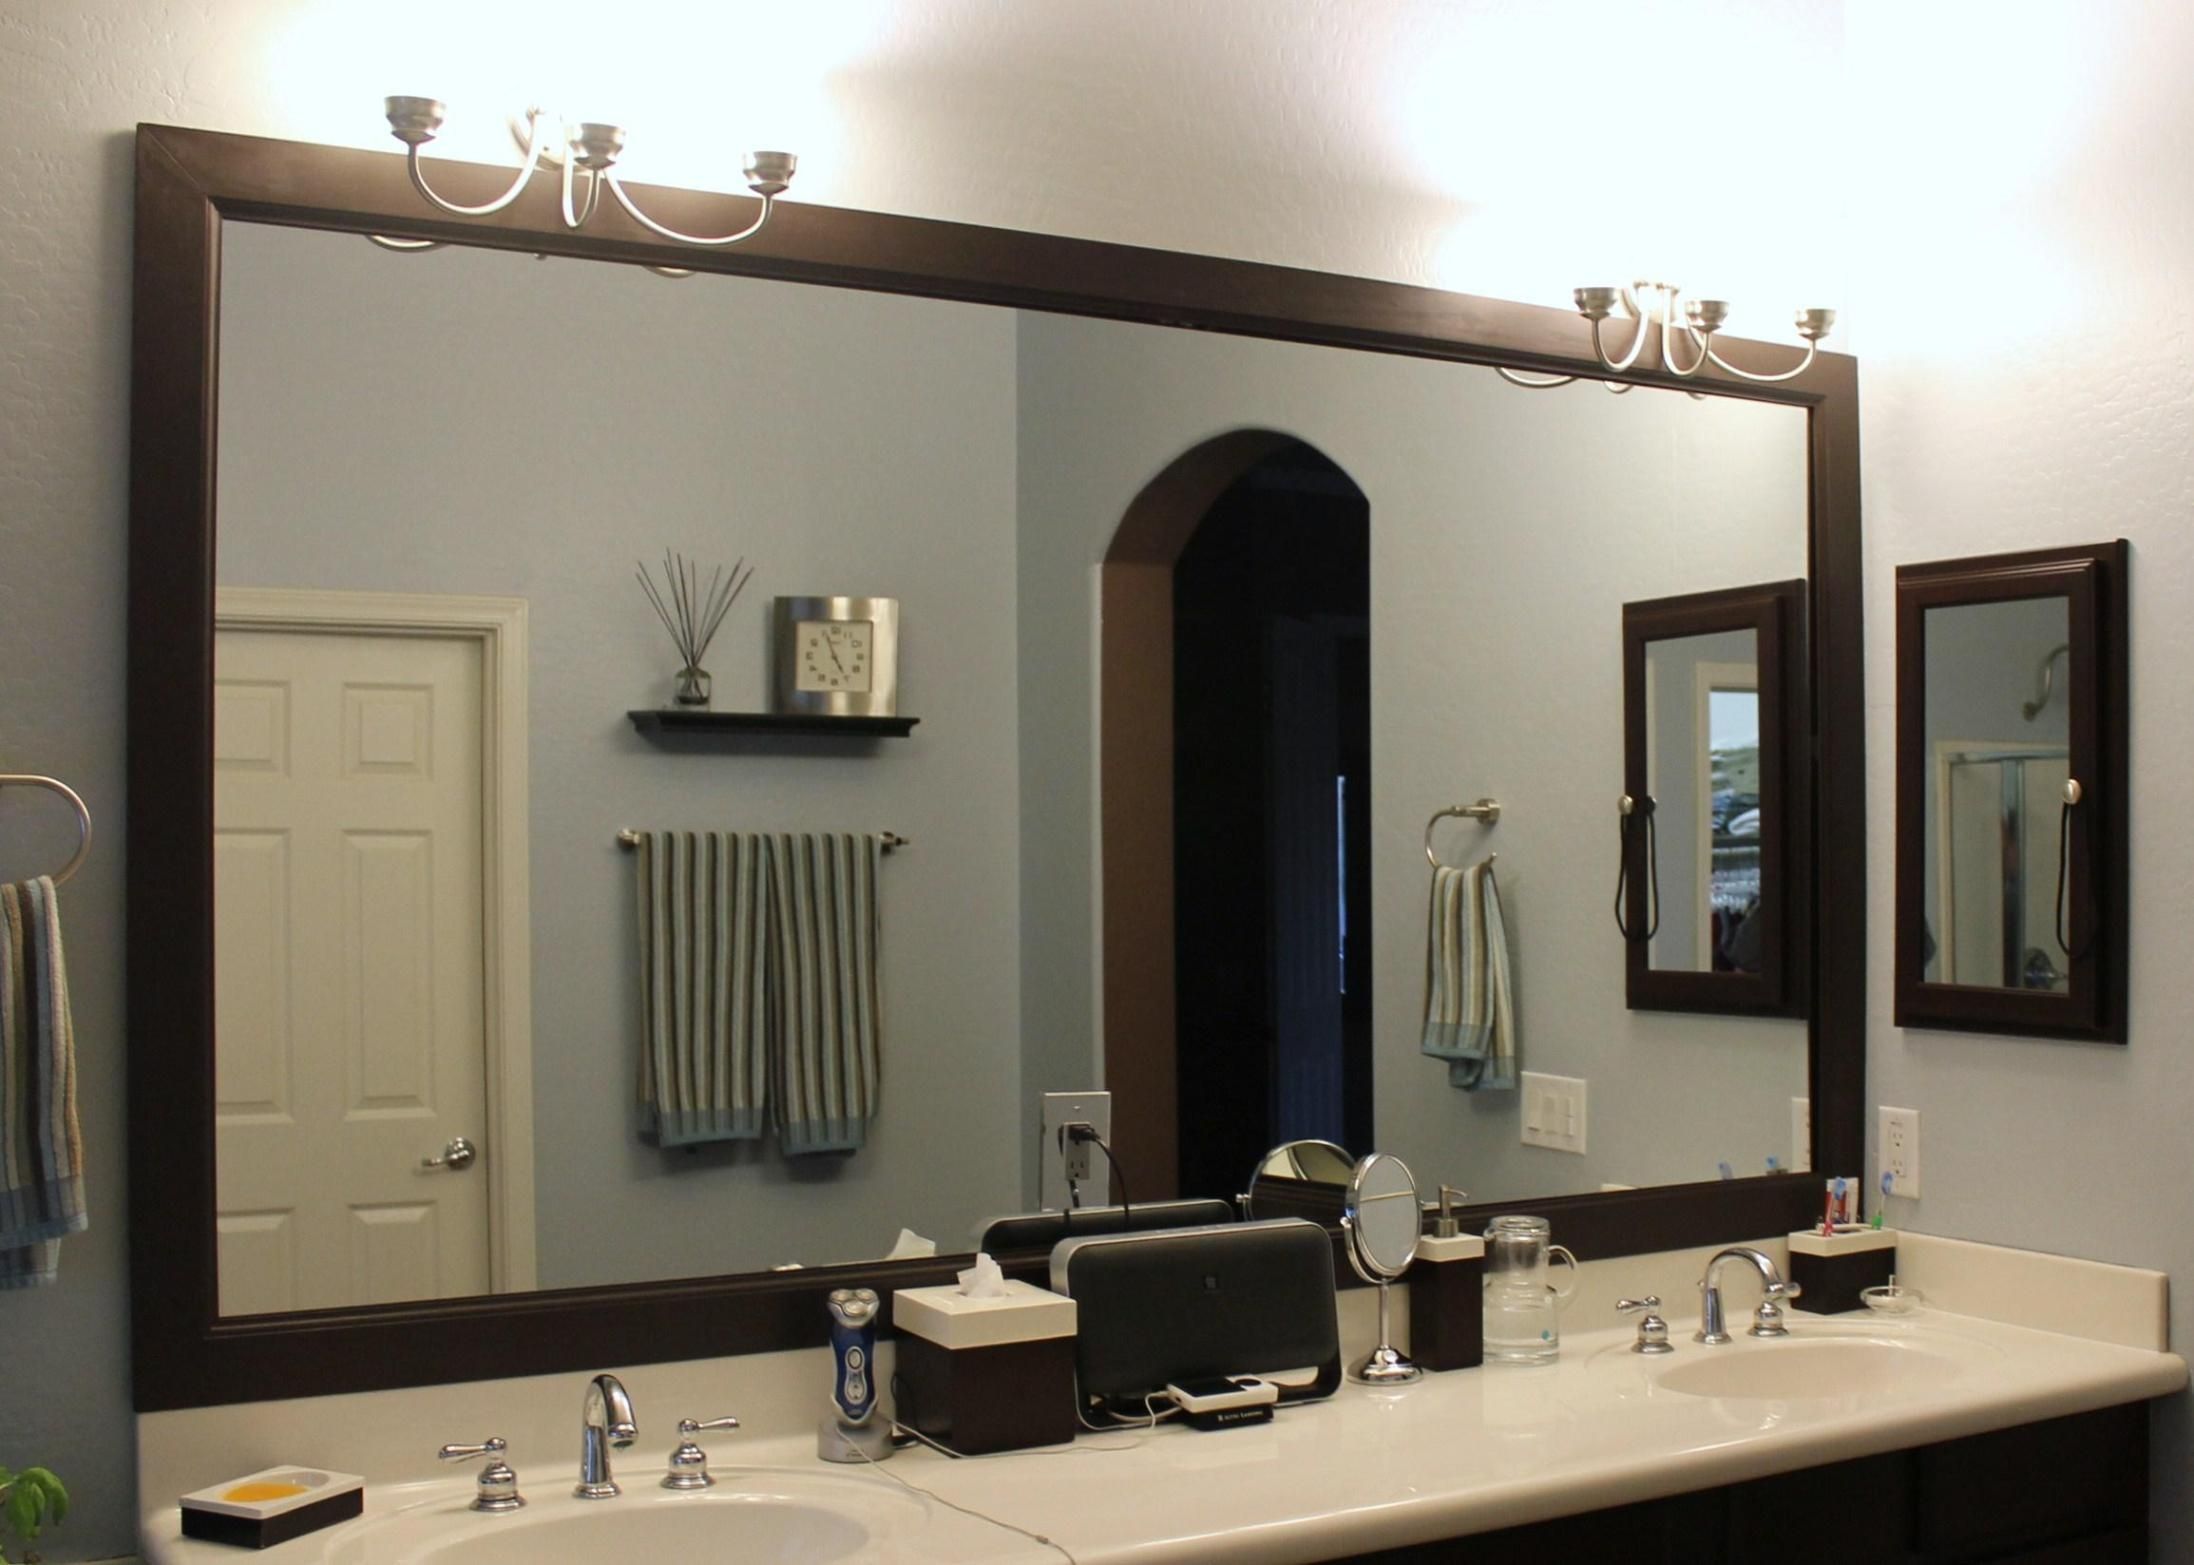 Hanging Bathroom Mirror Large Framed Mirrors For Bathrooms Large Regarding Large Framed Bathroom Wall Mirrors (View 17 of 20)